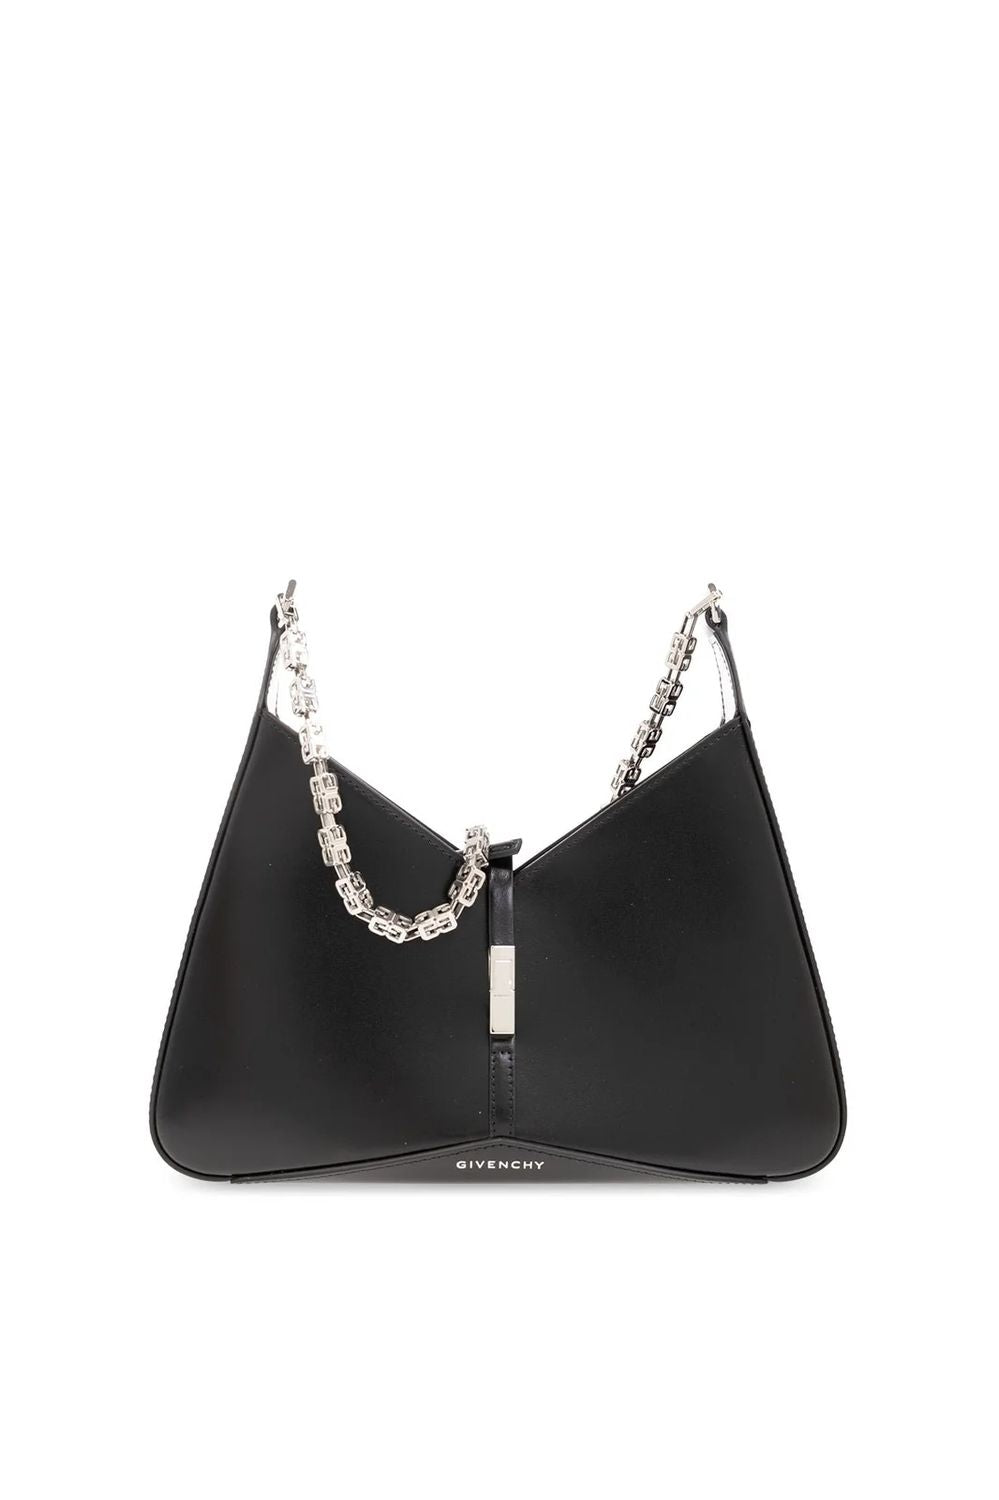 Shop Givenchy Sophisticated And Chic Black Leather Shoulder Bag For Women